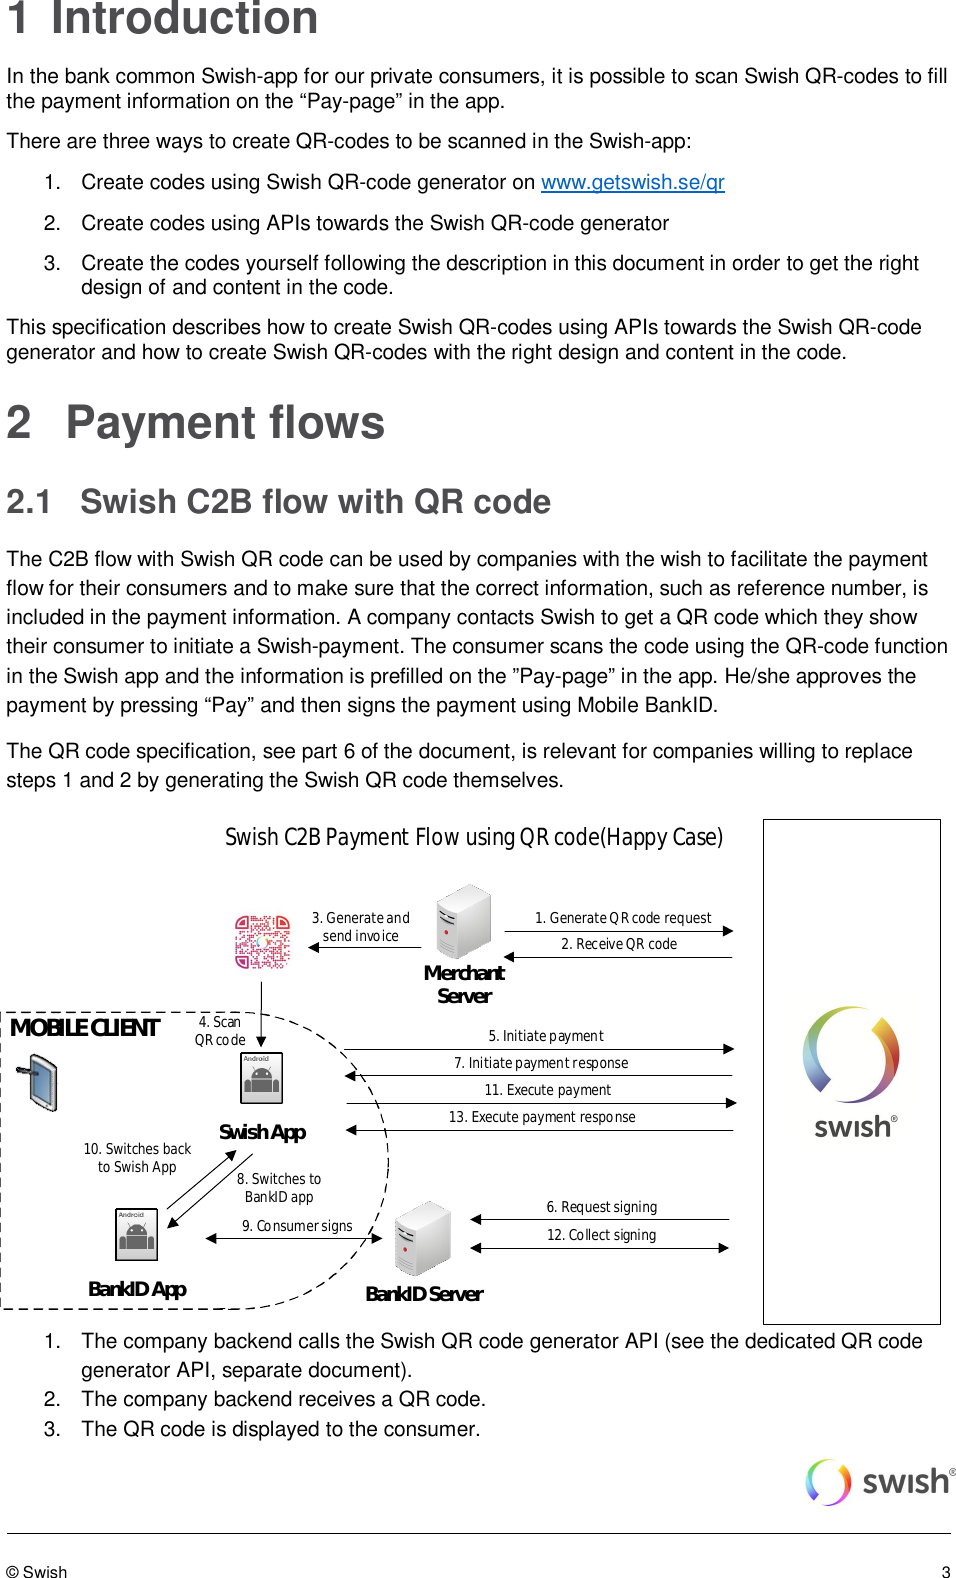 Page 3 of 8 - Guide-Swish-QR-code-design-specification V1.5